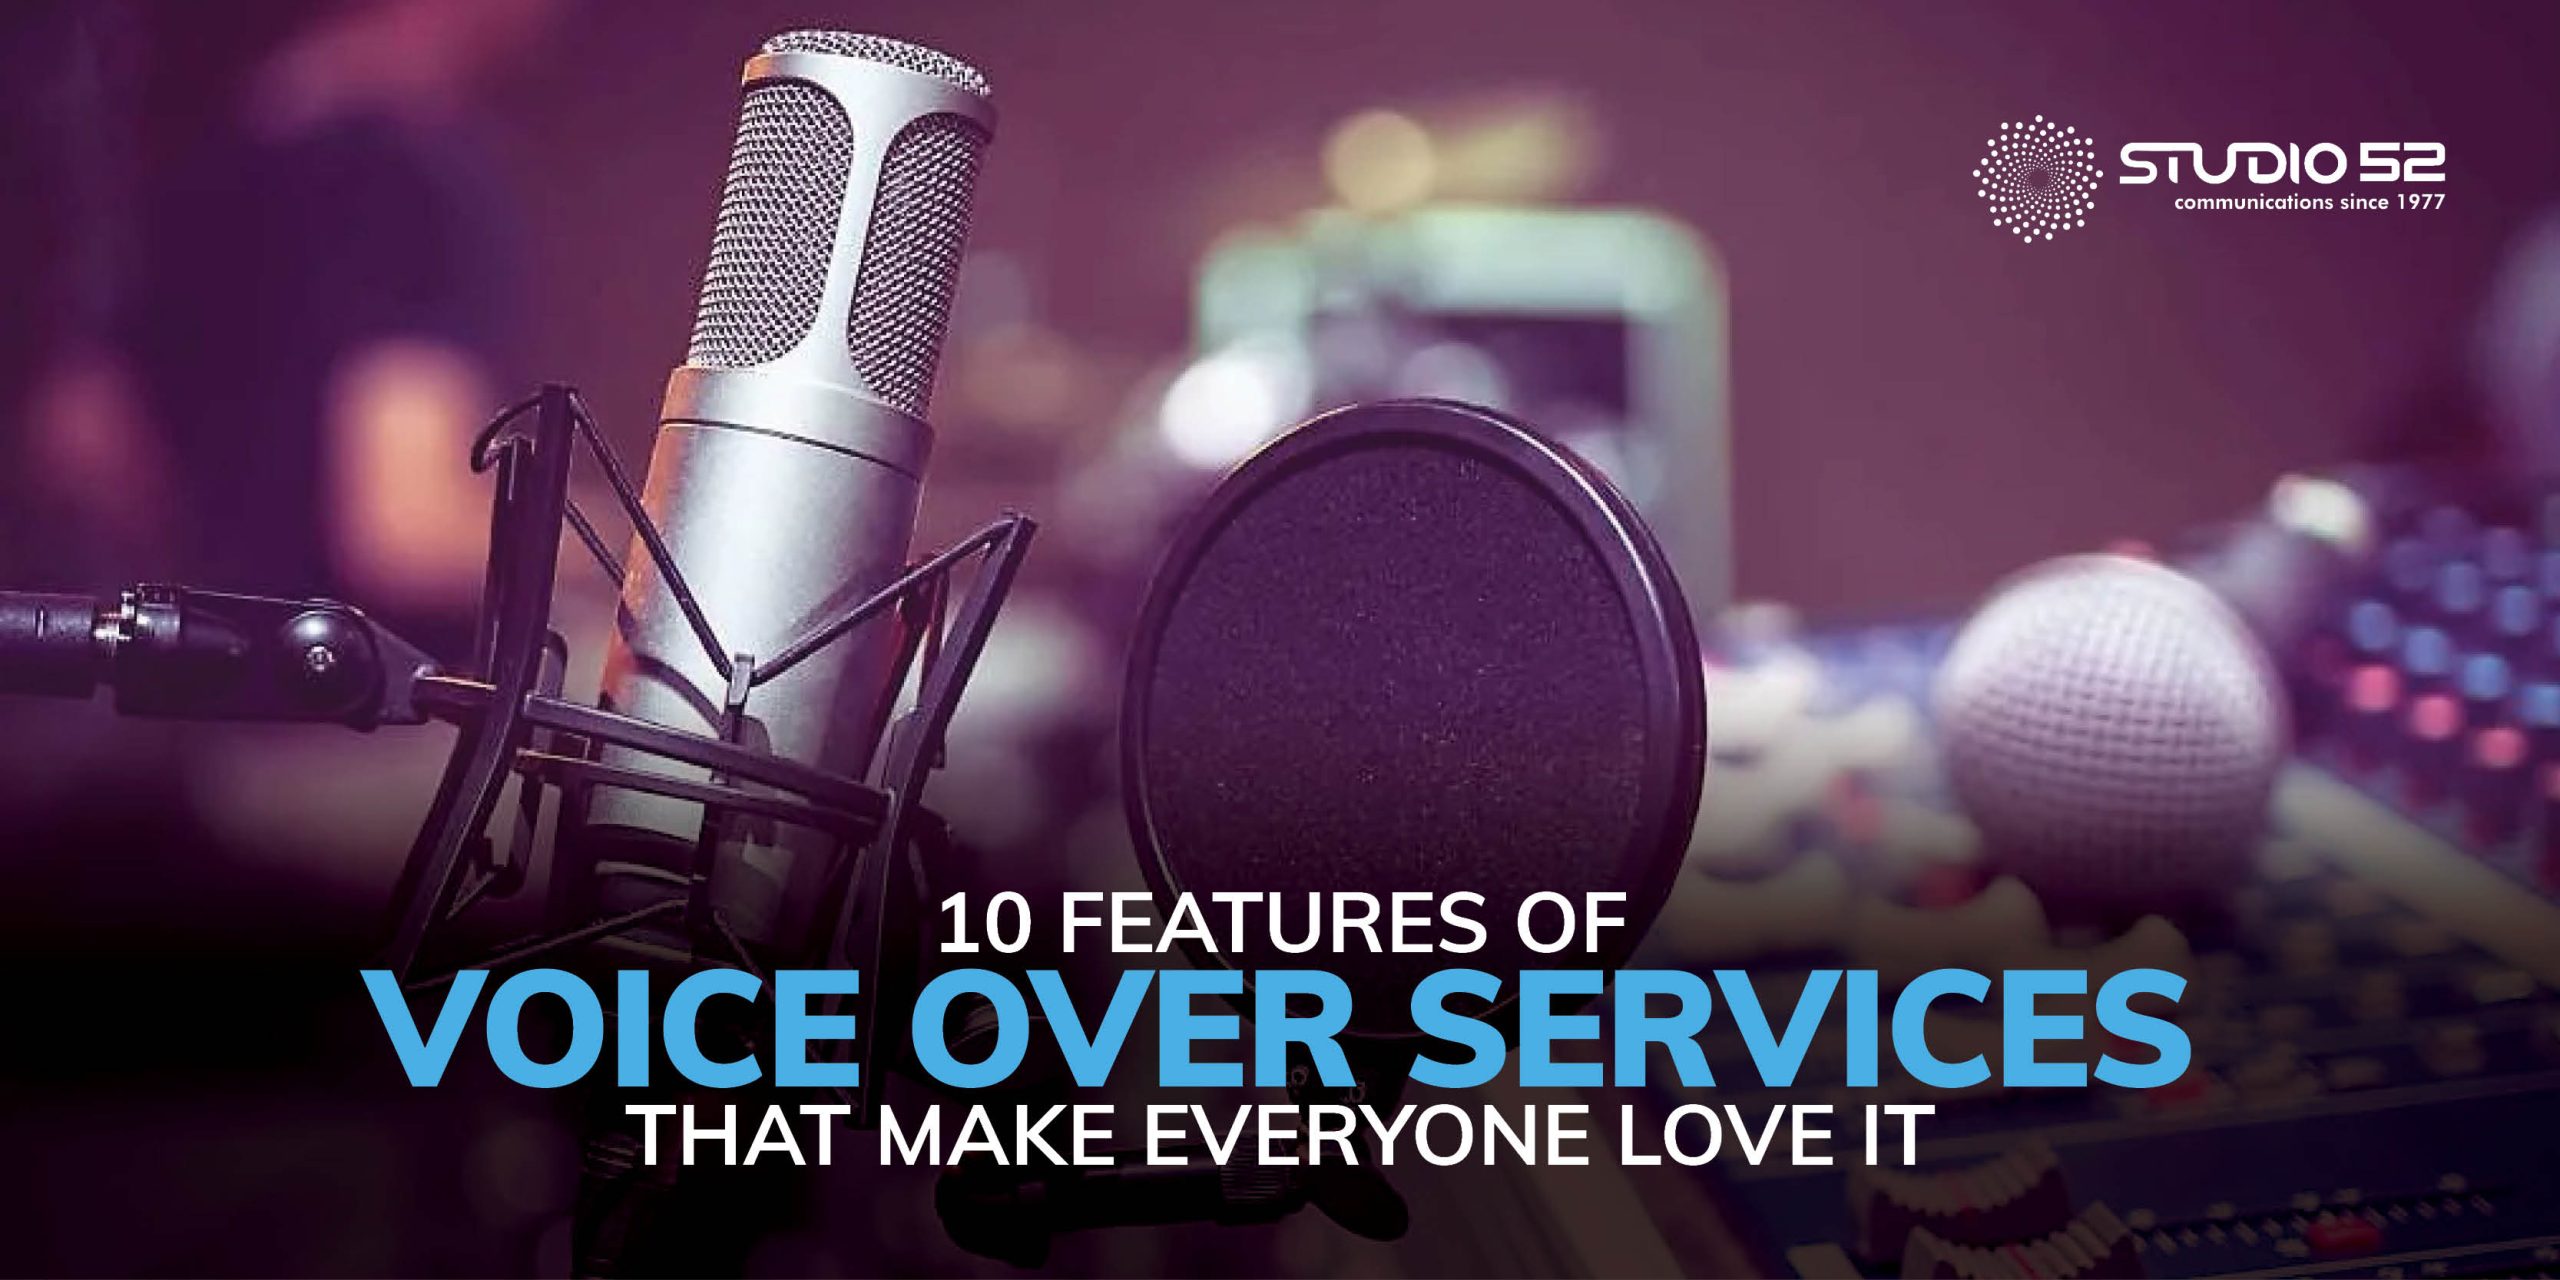 10 Features of Voice Over Services that Make Everyone Love it - Studio 52